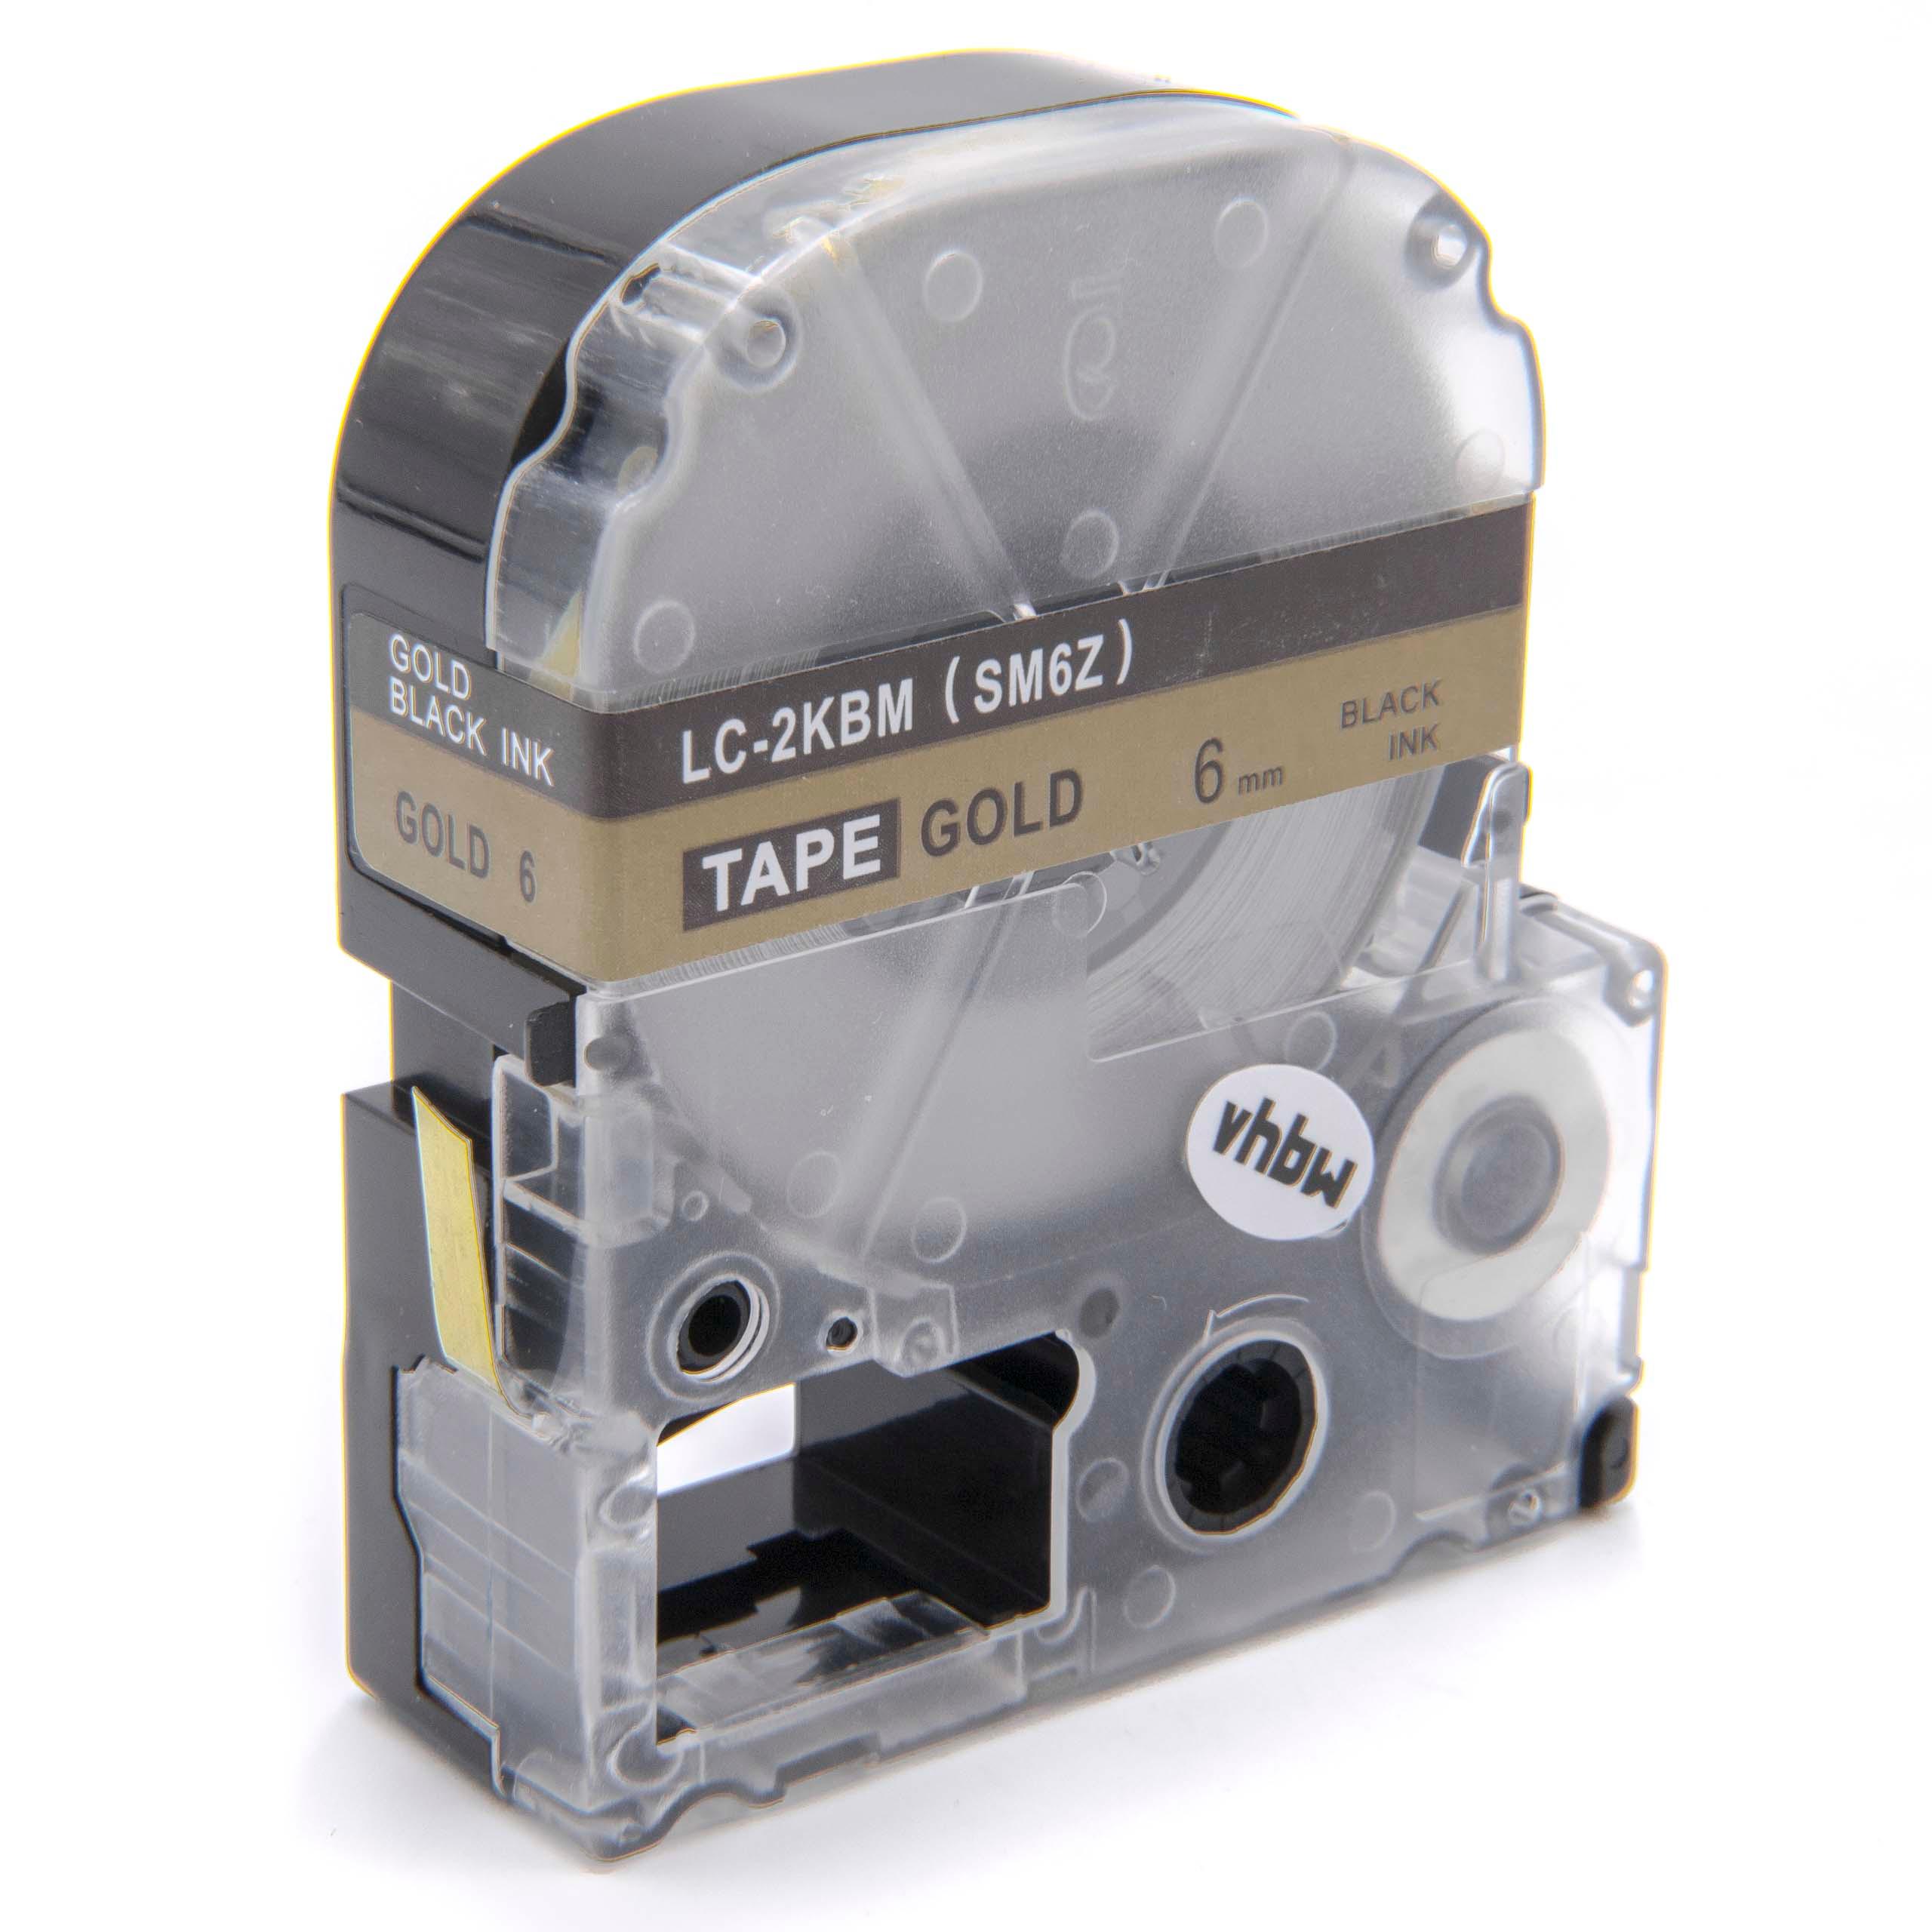 Label Tape as Replacement for Epson LC-2KBM - 6 mm Black to Gold